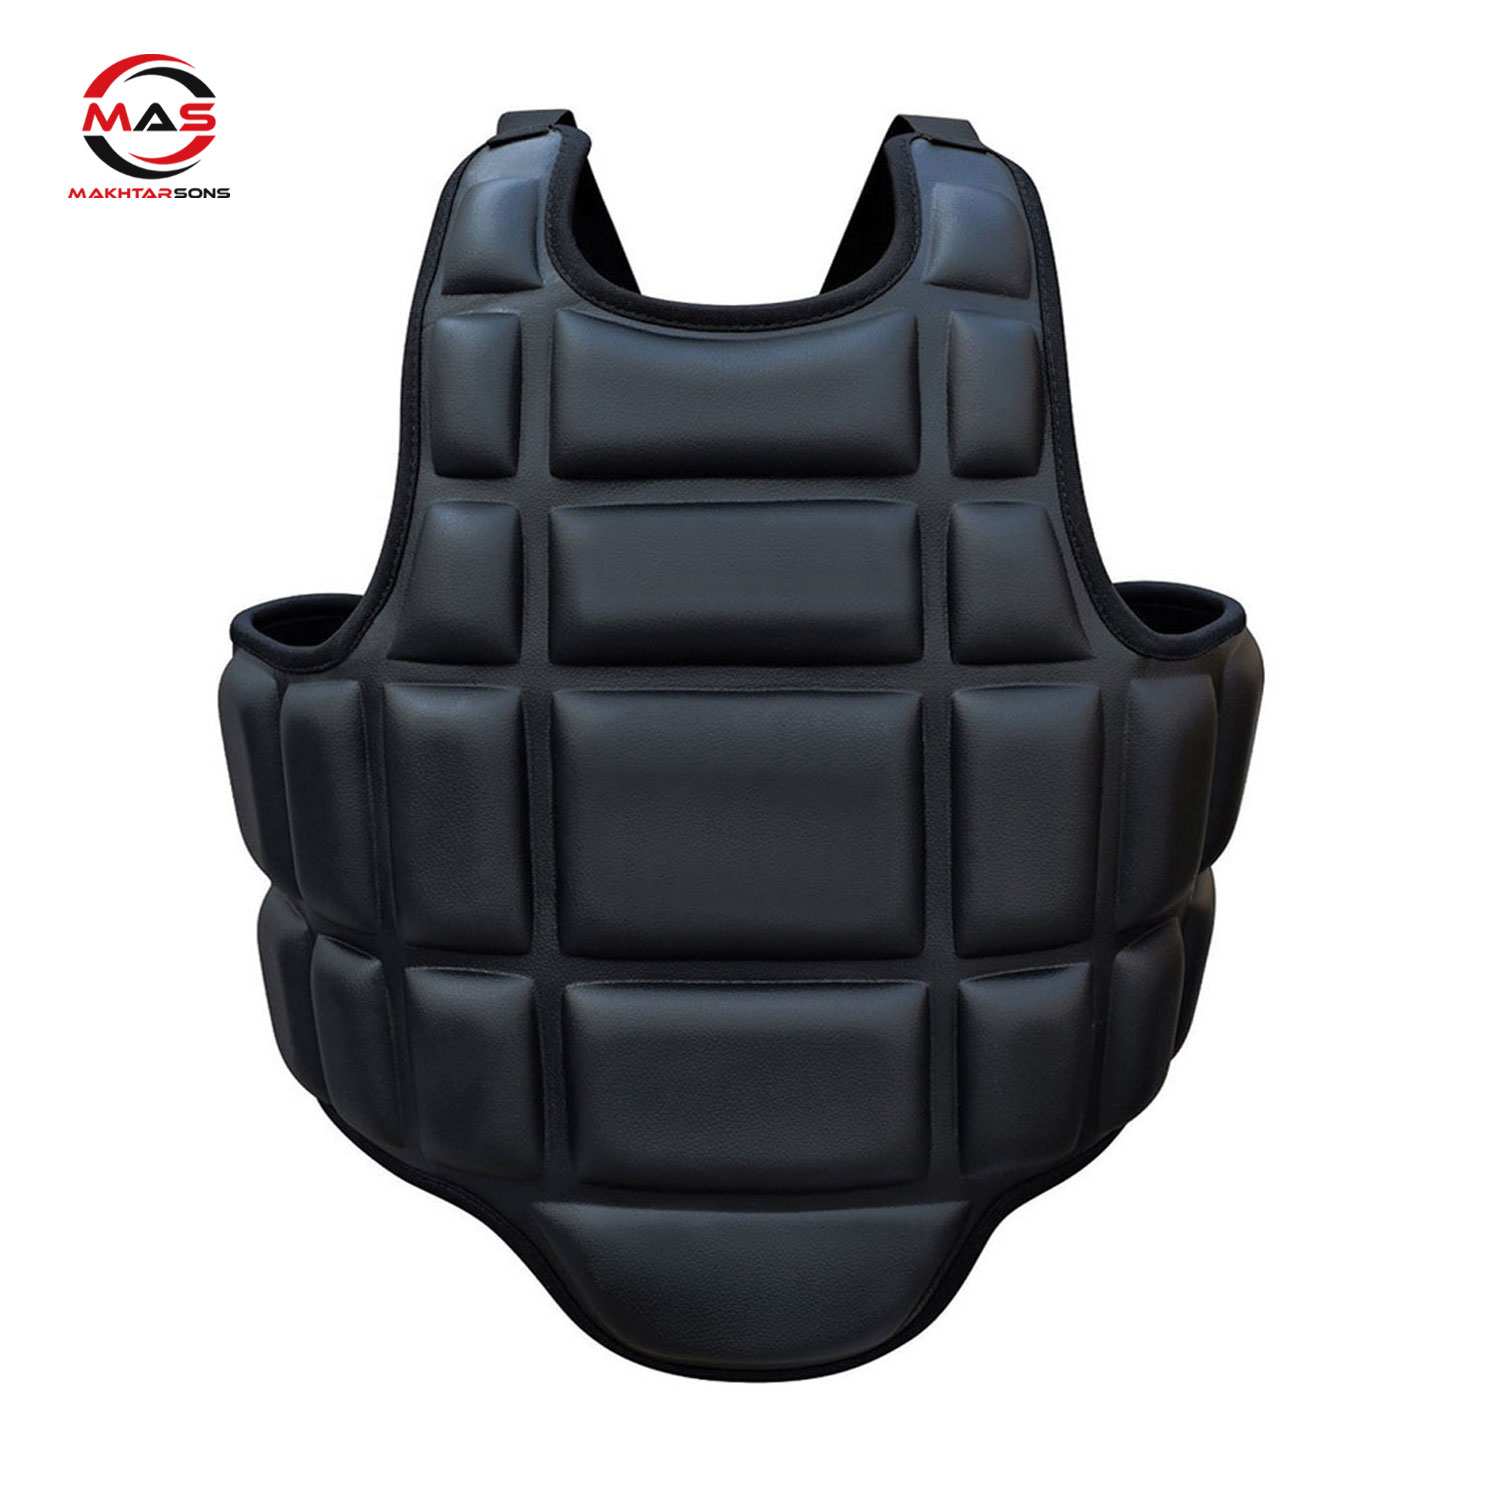 BODY CHEST PROTECTOR | MAS 283